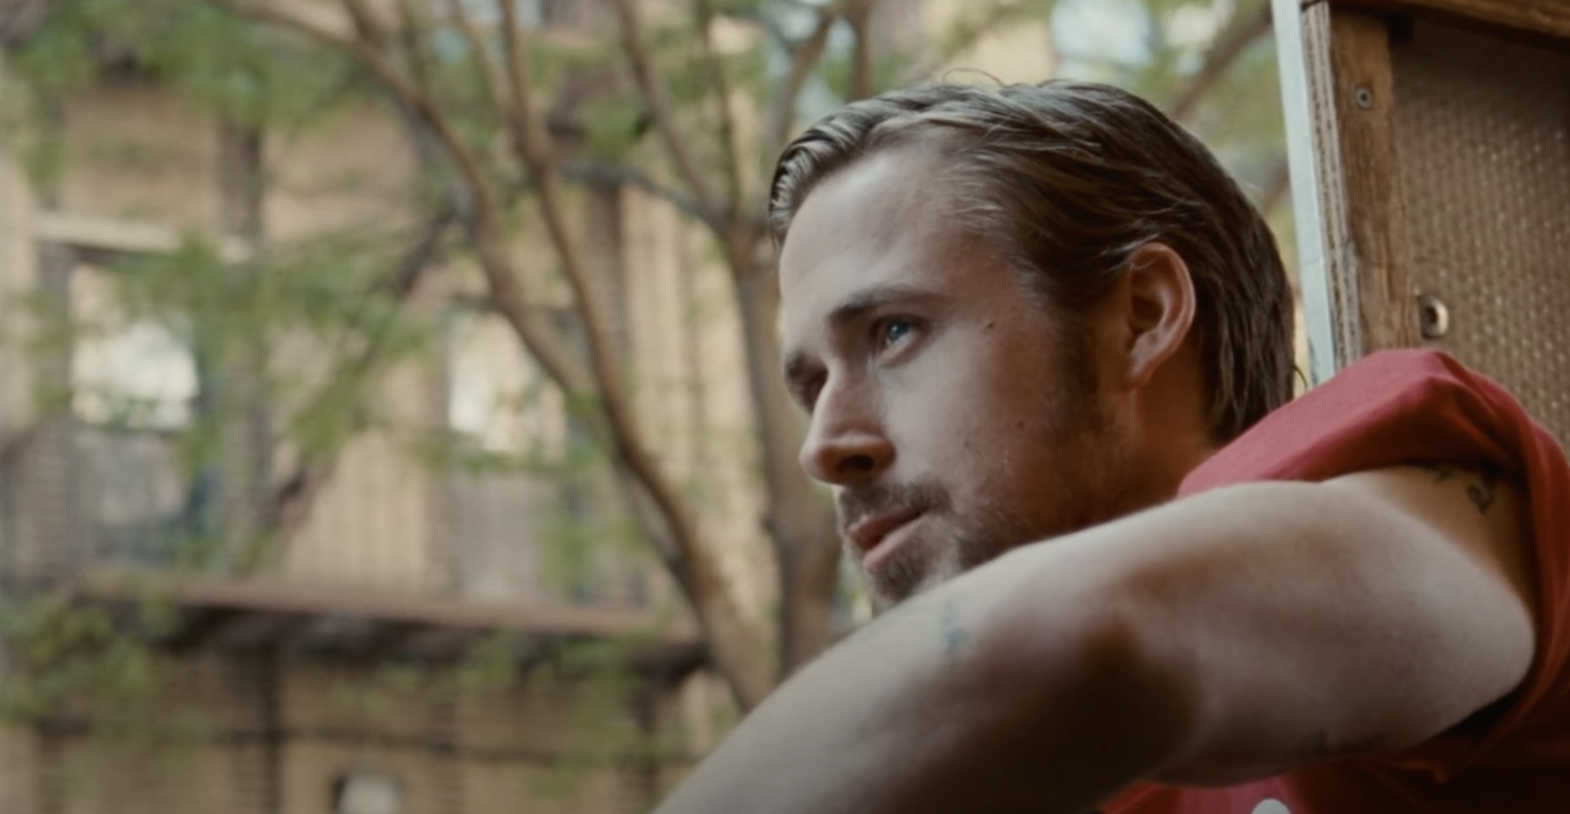 Ryan Gosling looks off into the distance